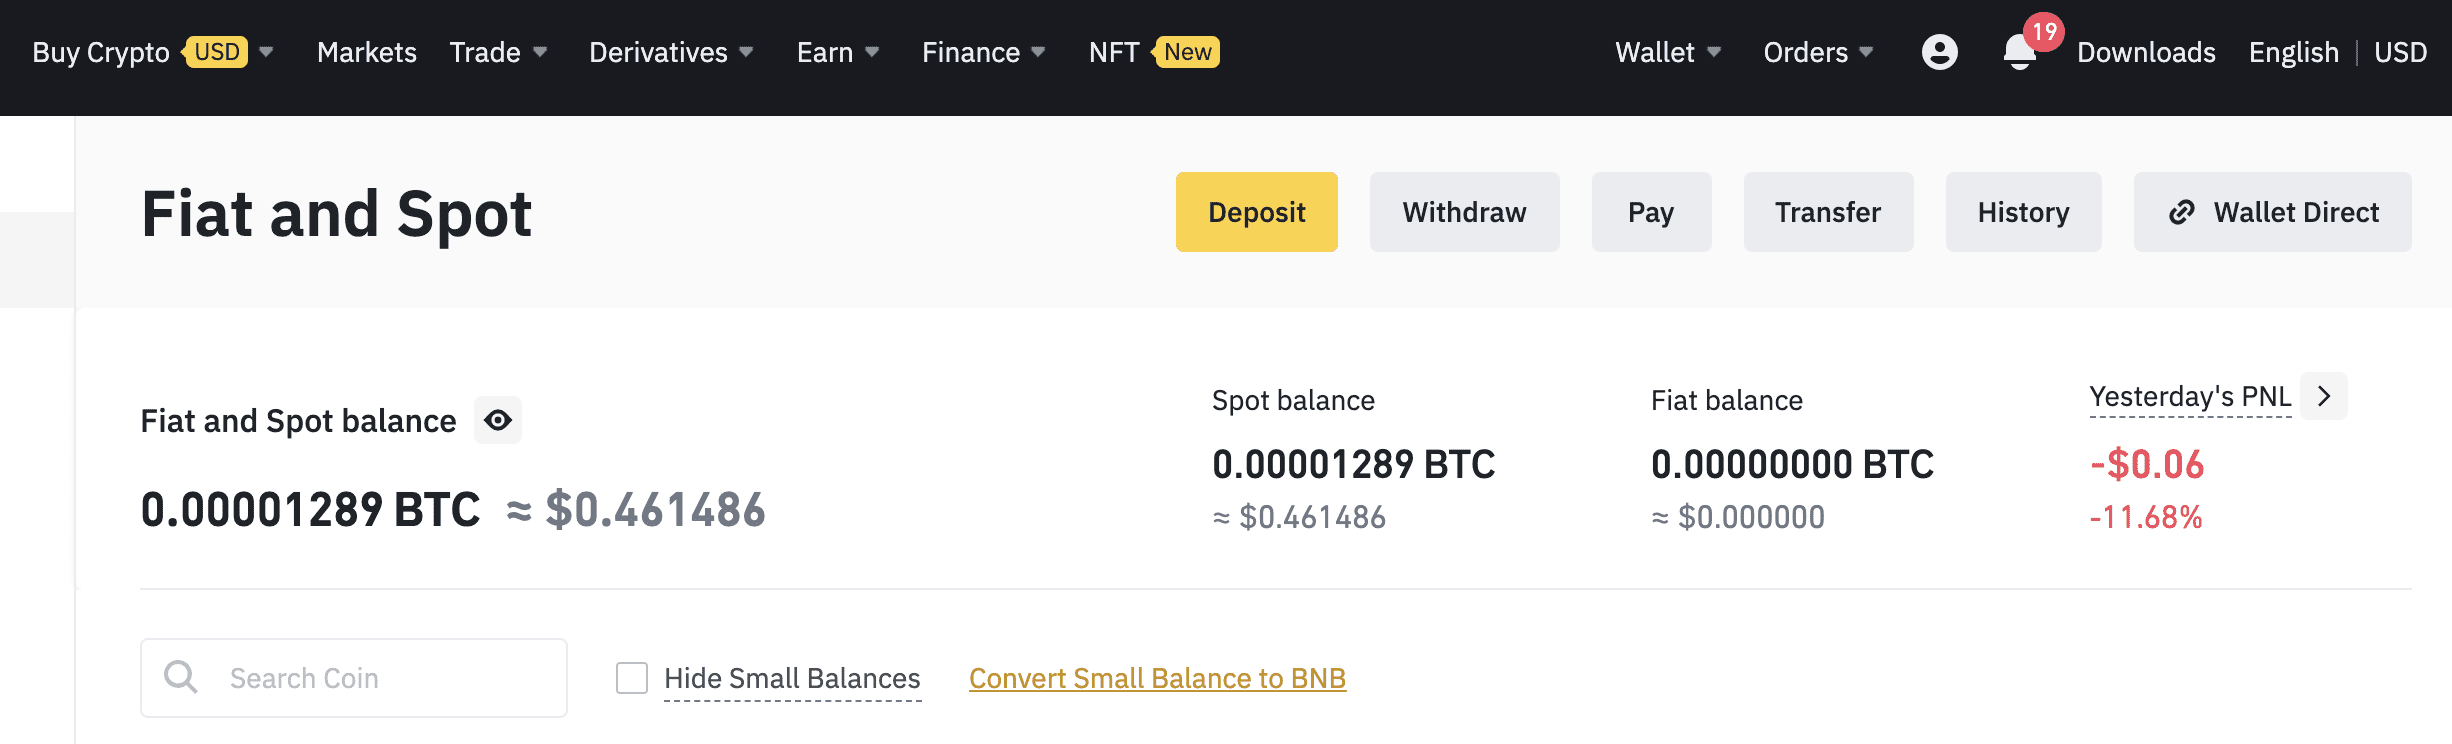 {binance} Dealing with Dust